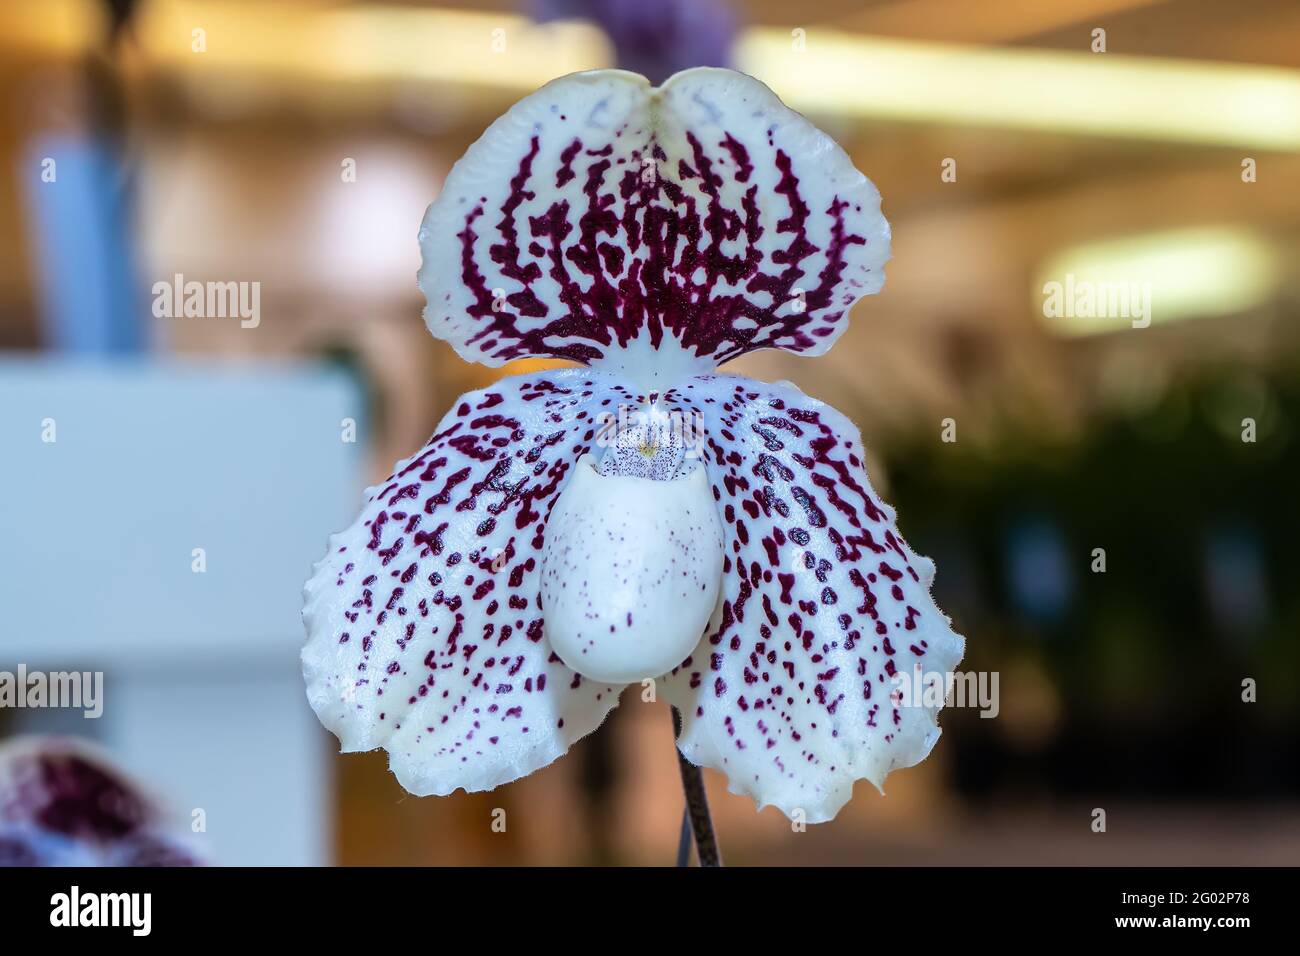 Paphiopedilum is a species of orchid. Stock Photo